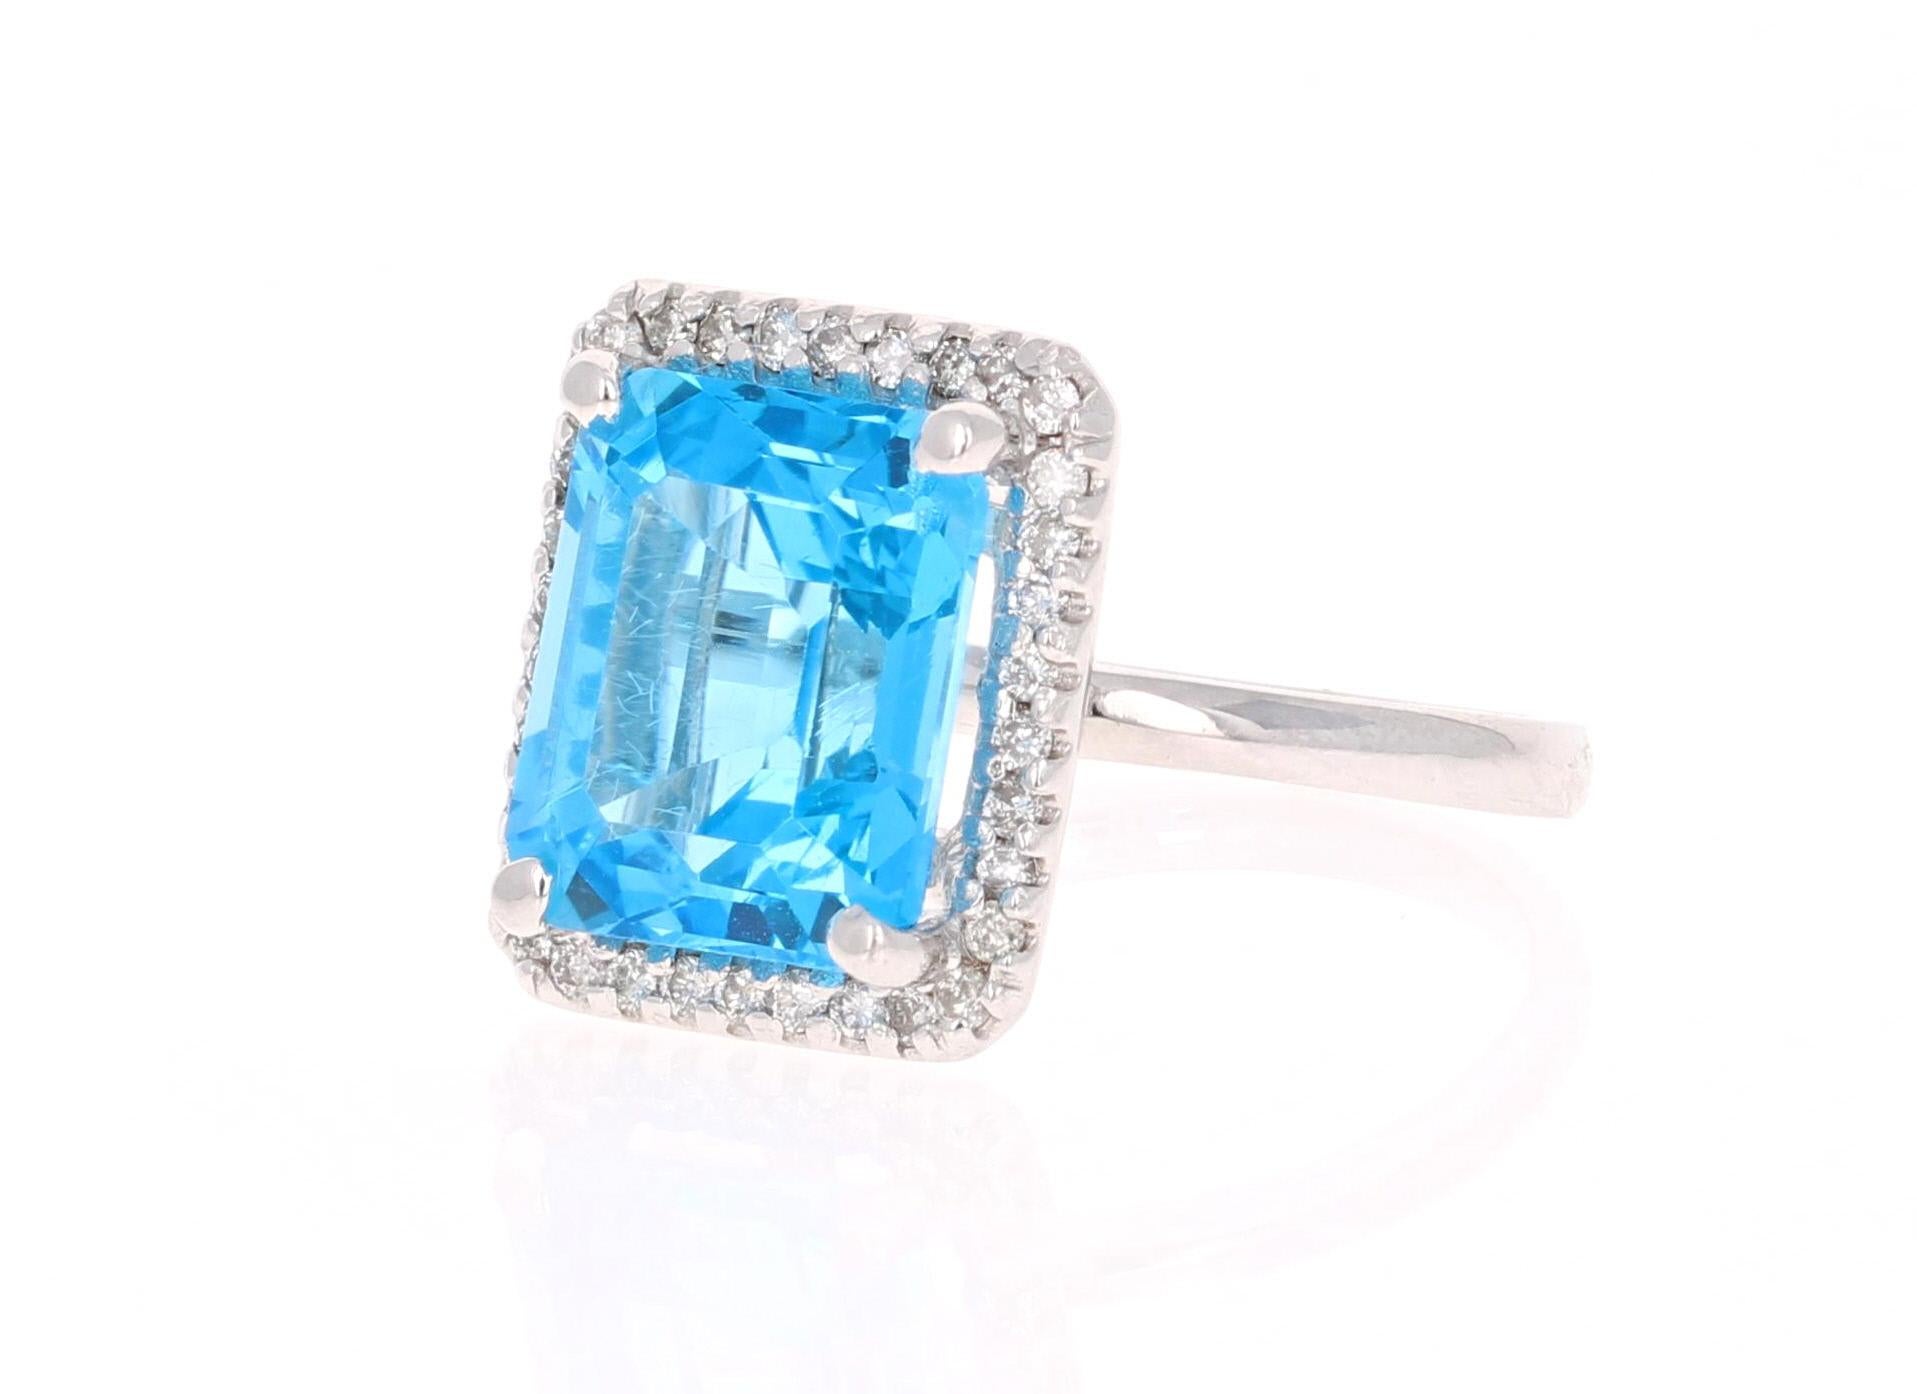 This beautiful Emerald cut Blue Topaz and Diamond ring has a stunningly large Blue Topaz that weighs 7.98 Carats. It is surrounded by 34 Round Cut Diamonds that weigh 0.34 Carats. The total carat weight of the ring is 8.32 Carats. 
The setting is